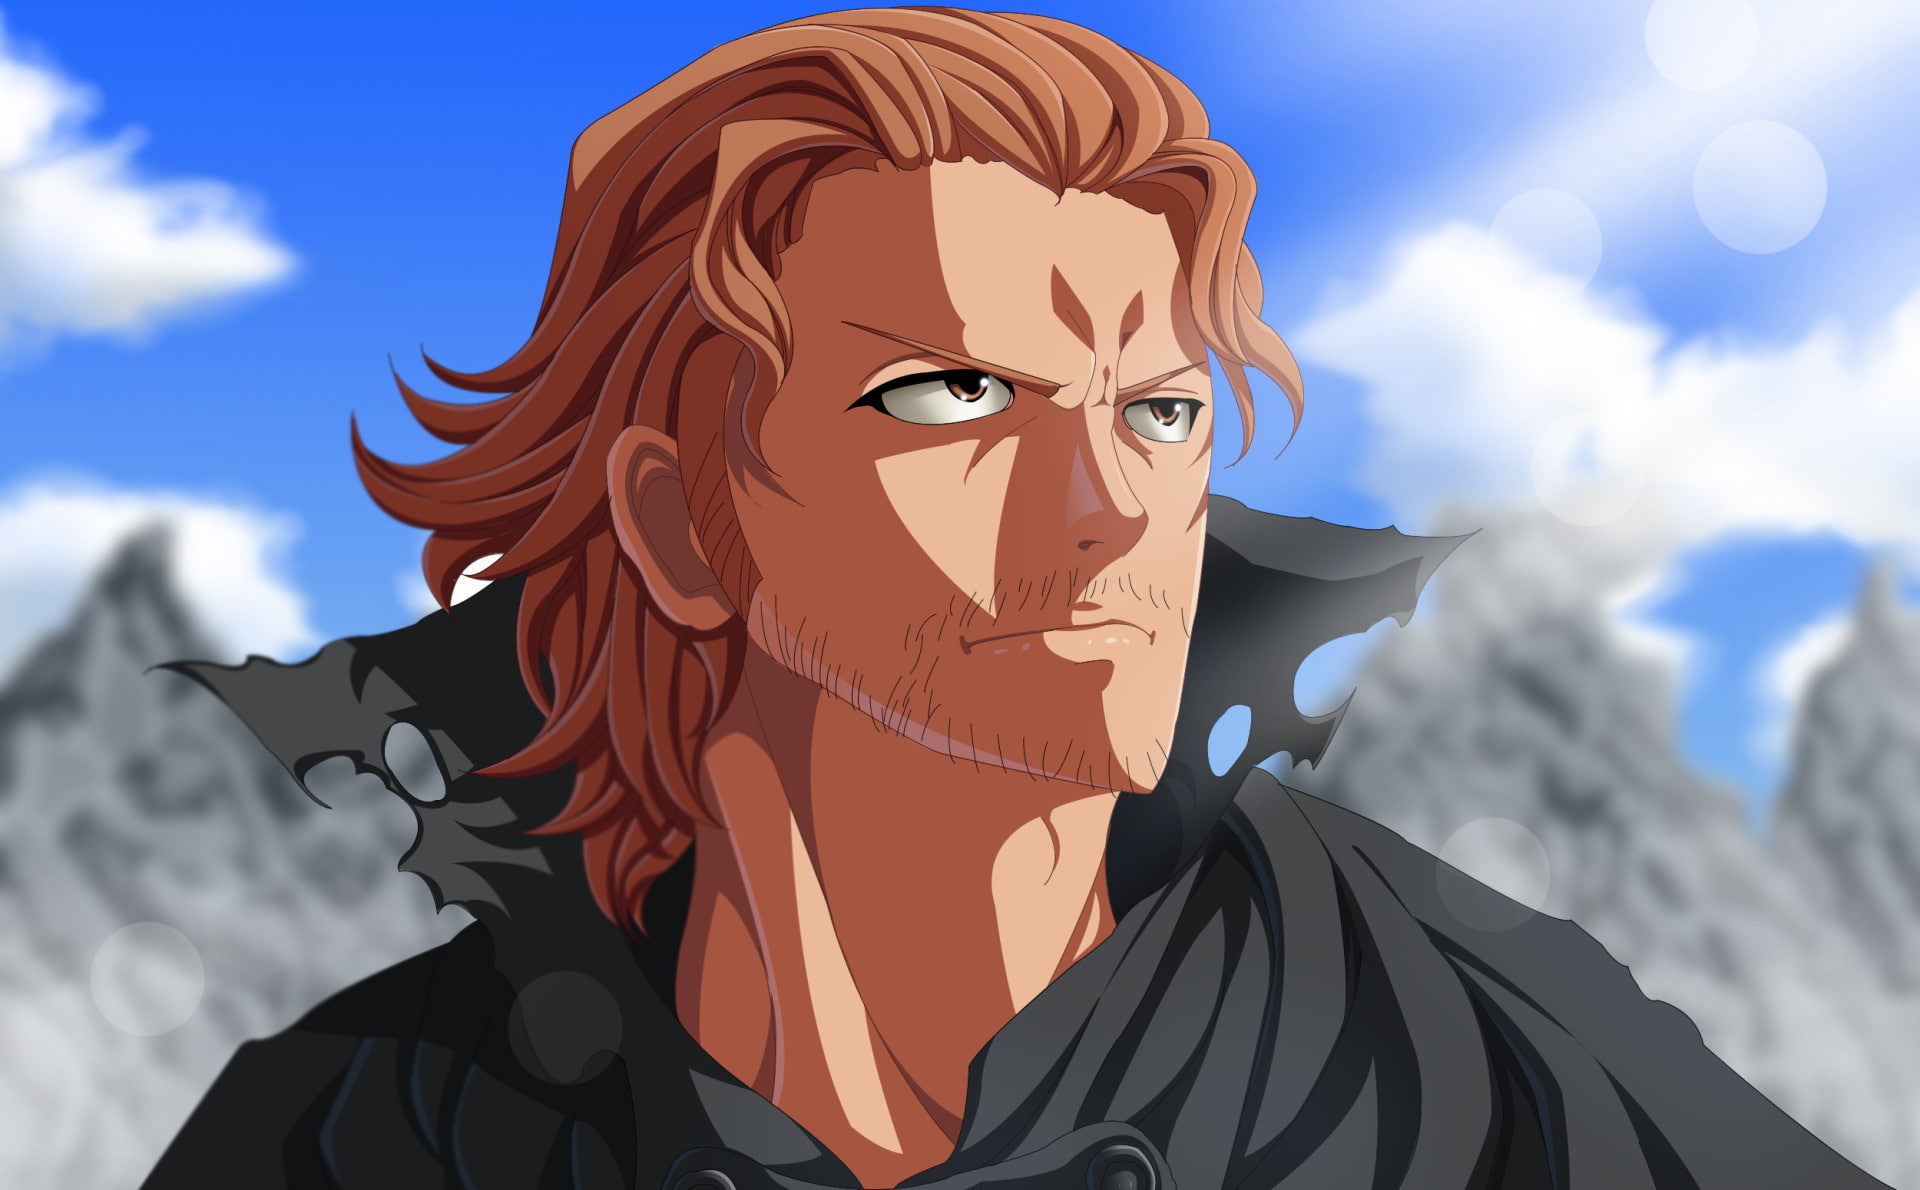 Anime, Fairy Tail, Gildarts Clive, sky, portrait, one person